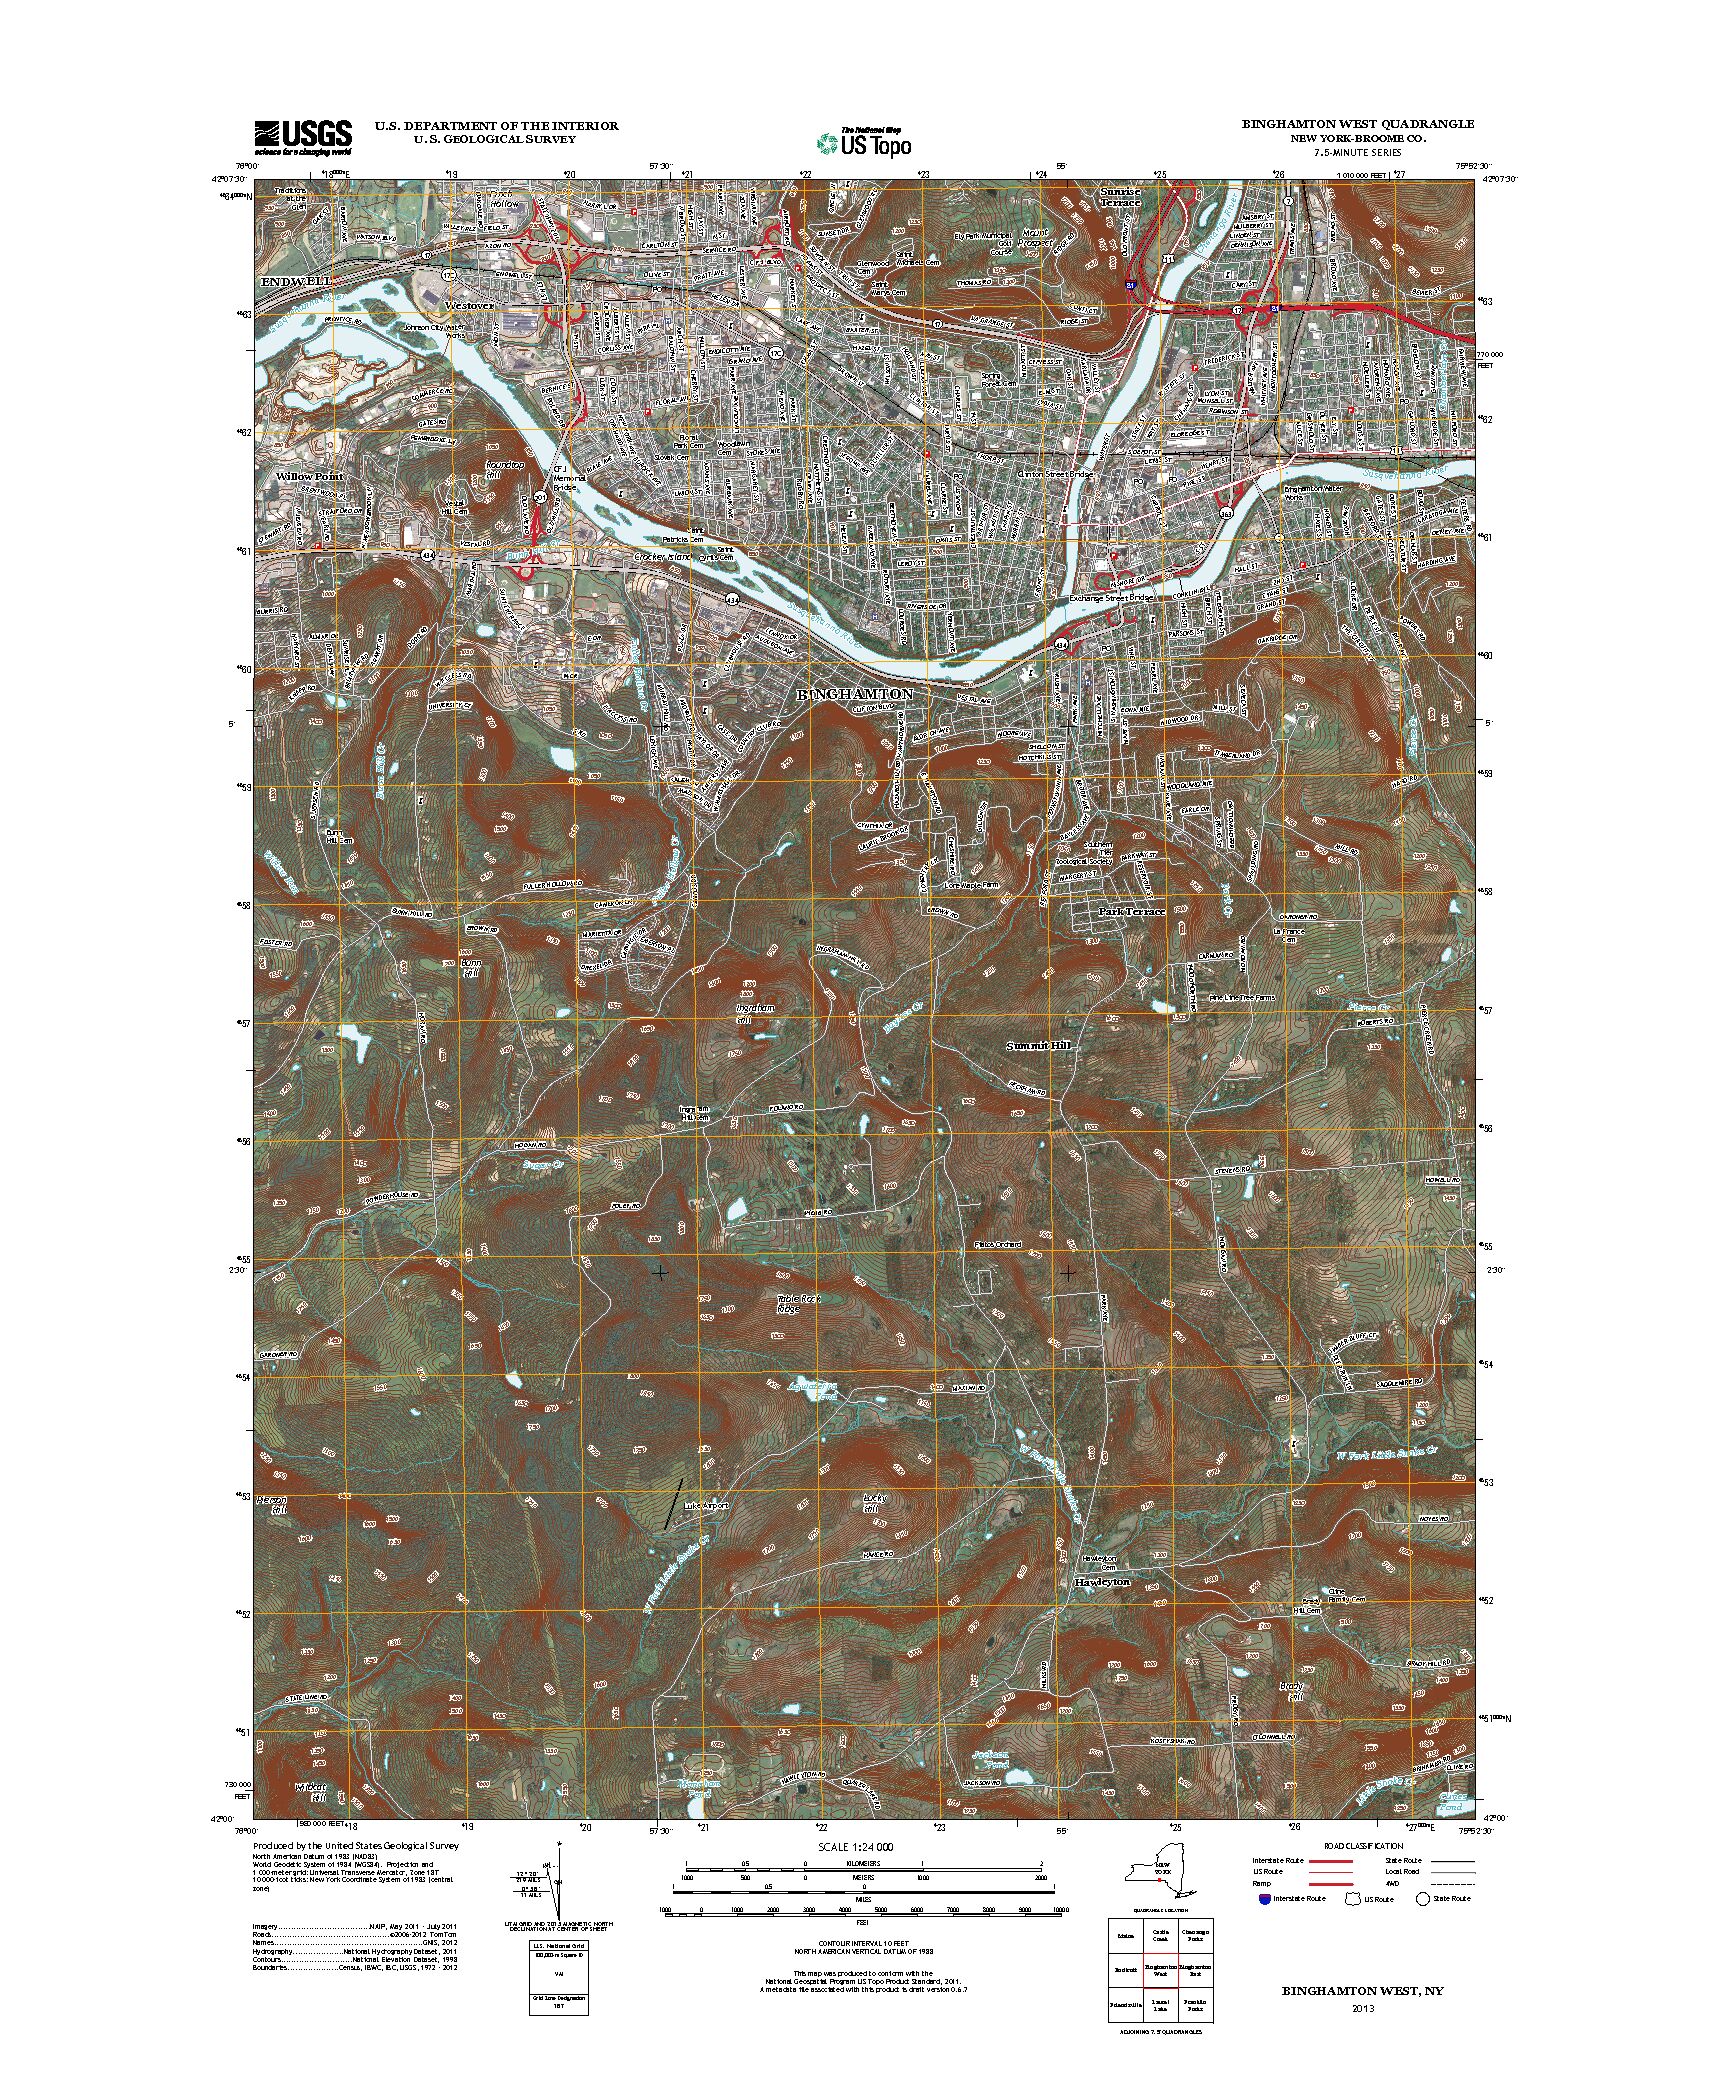 USGS 7.5-minute image map for Binghamton West New York